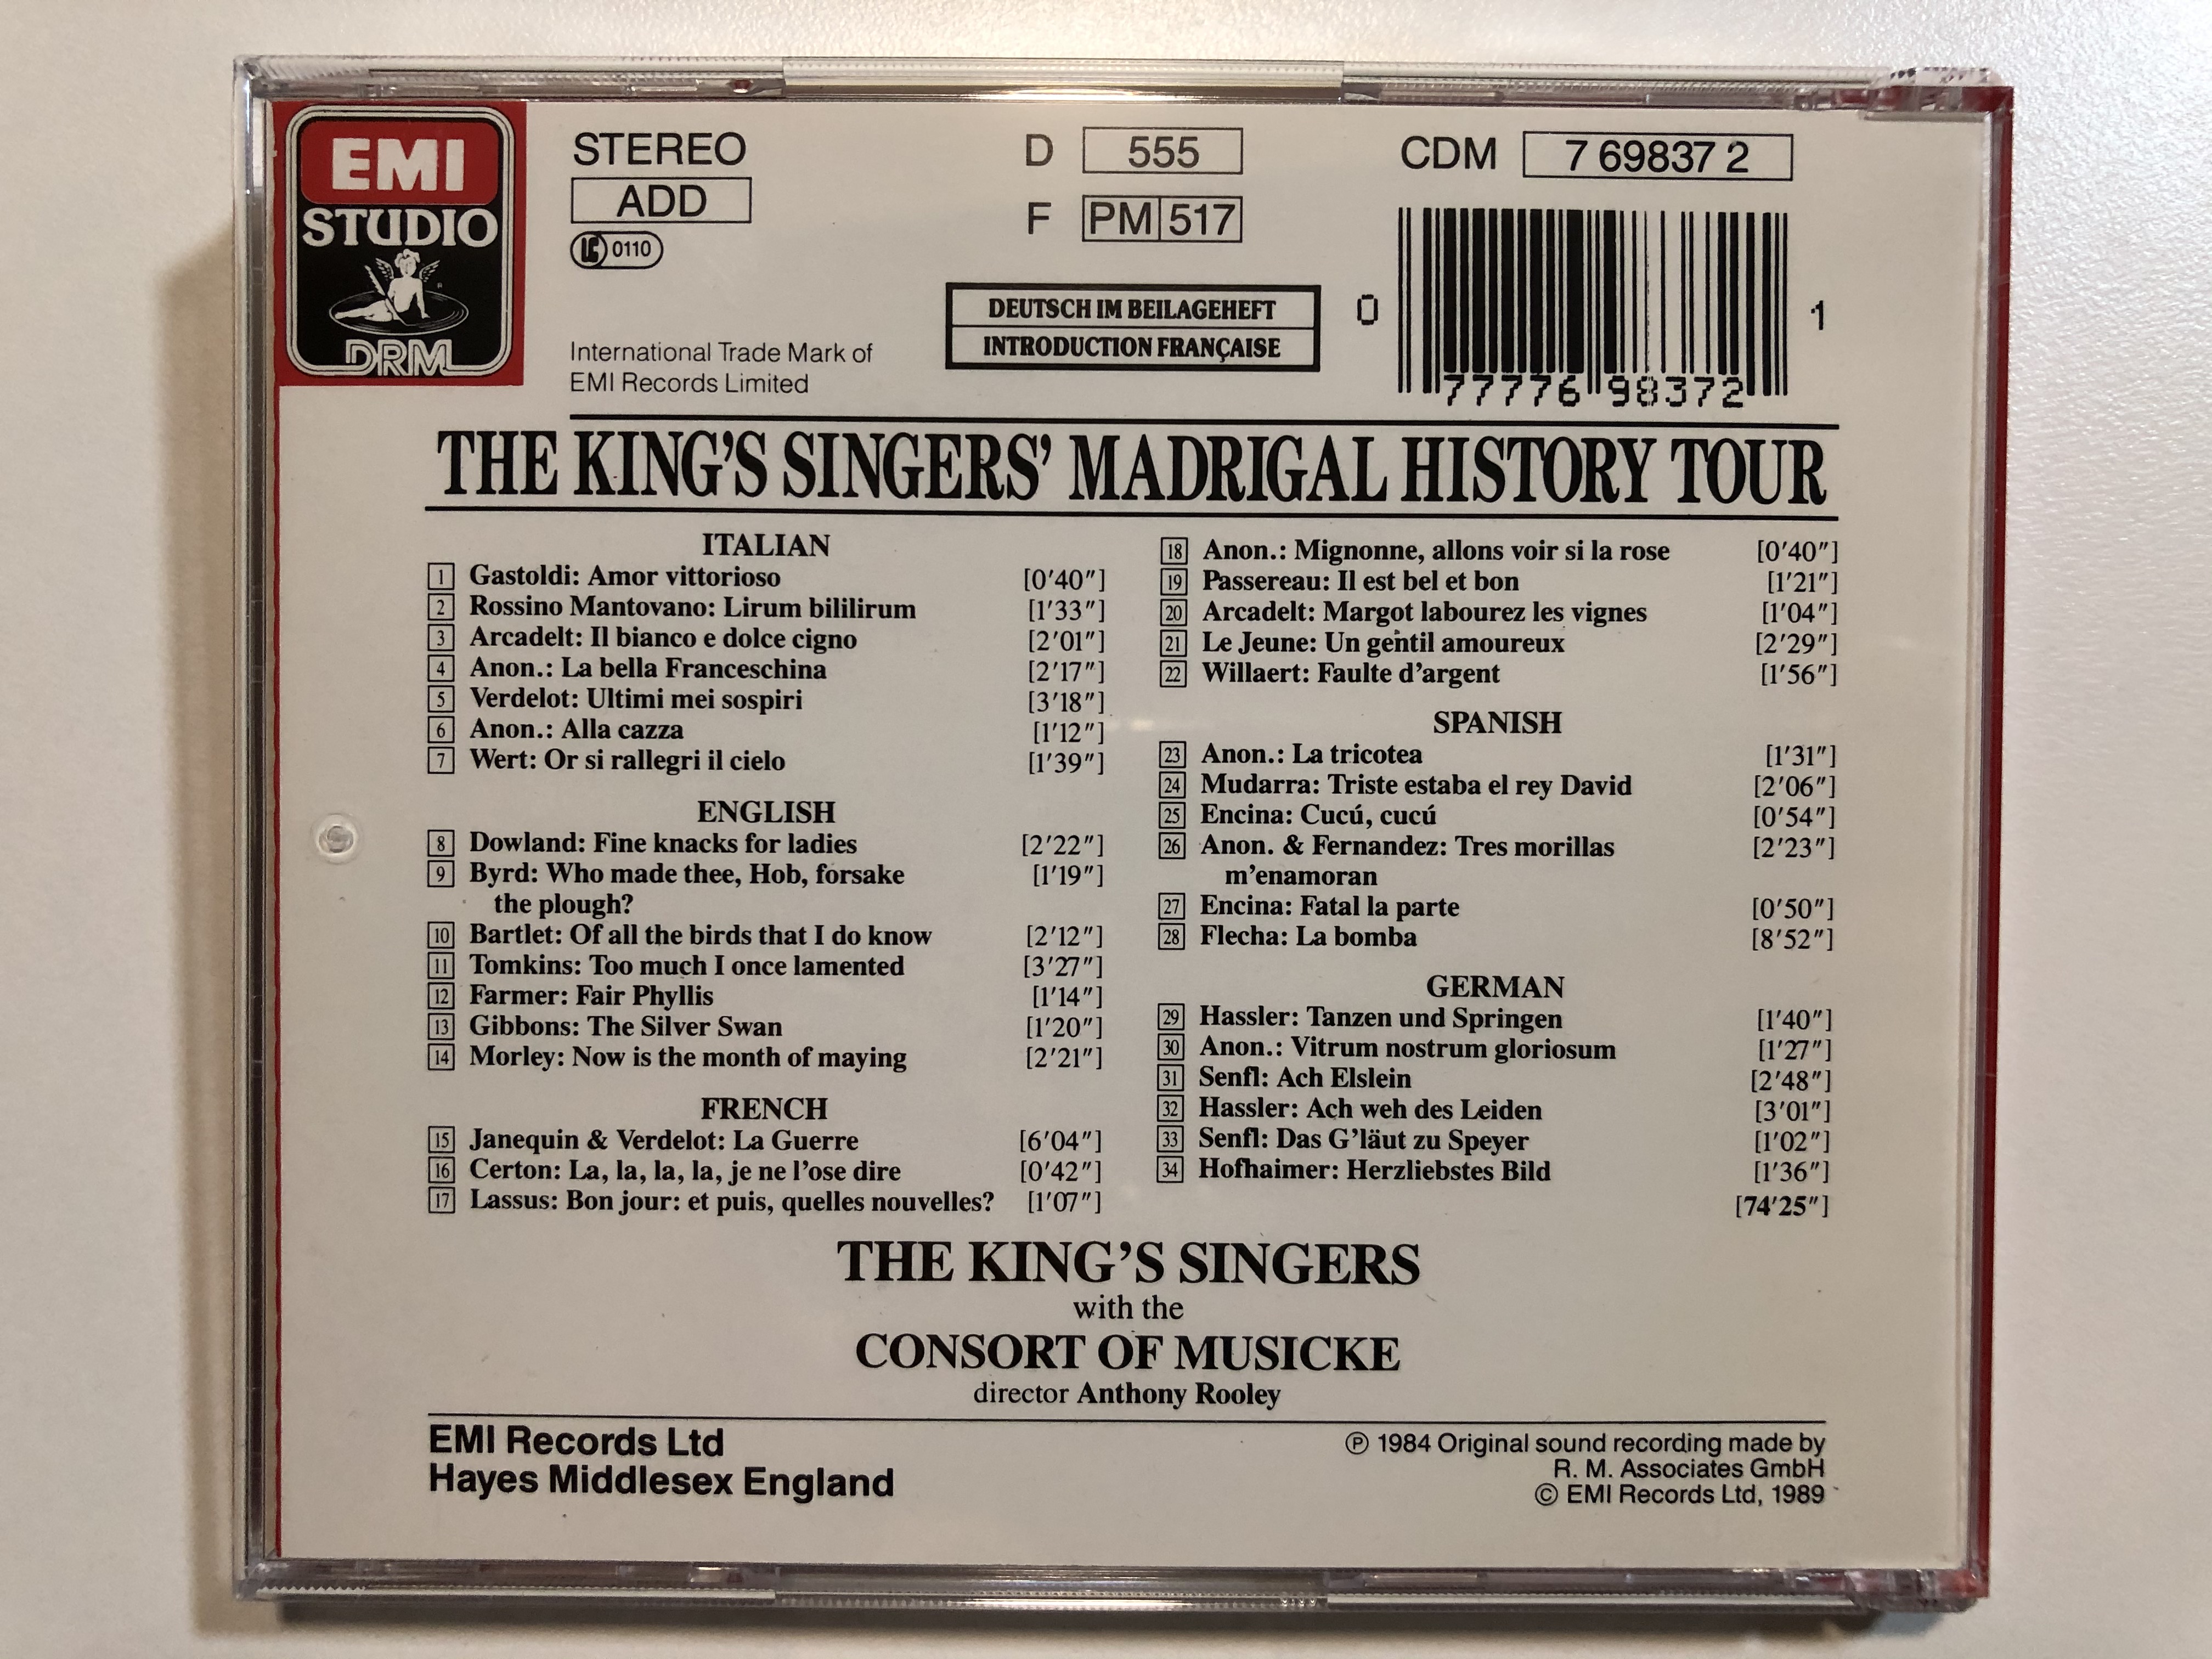 the-king-s-singers-madrigal-history-tour-italy-england-france-spain-germany-with-the-consort-of-musicke-director-anthony-rooley-emi-studio-drm-audio-cd-1989-stereo-cdm-7-69837-2-1-7-.jpg